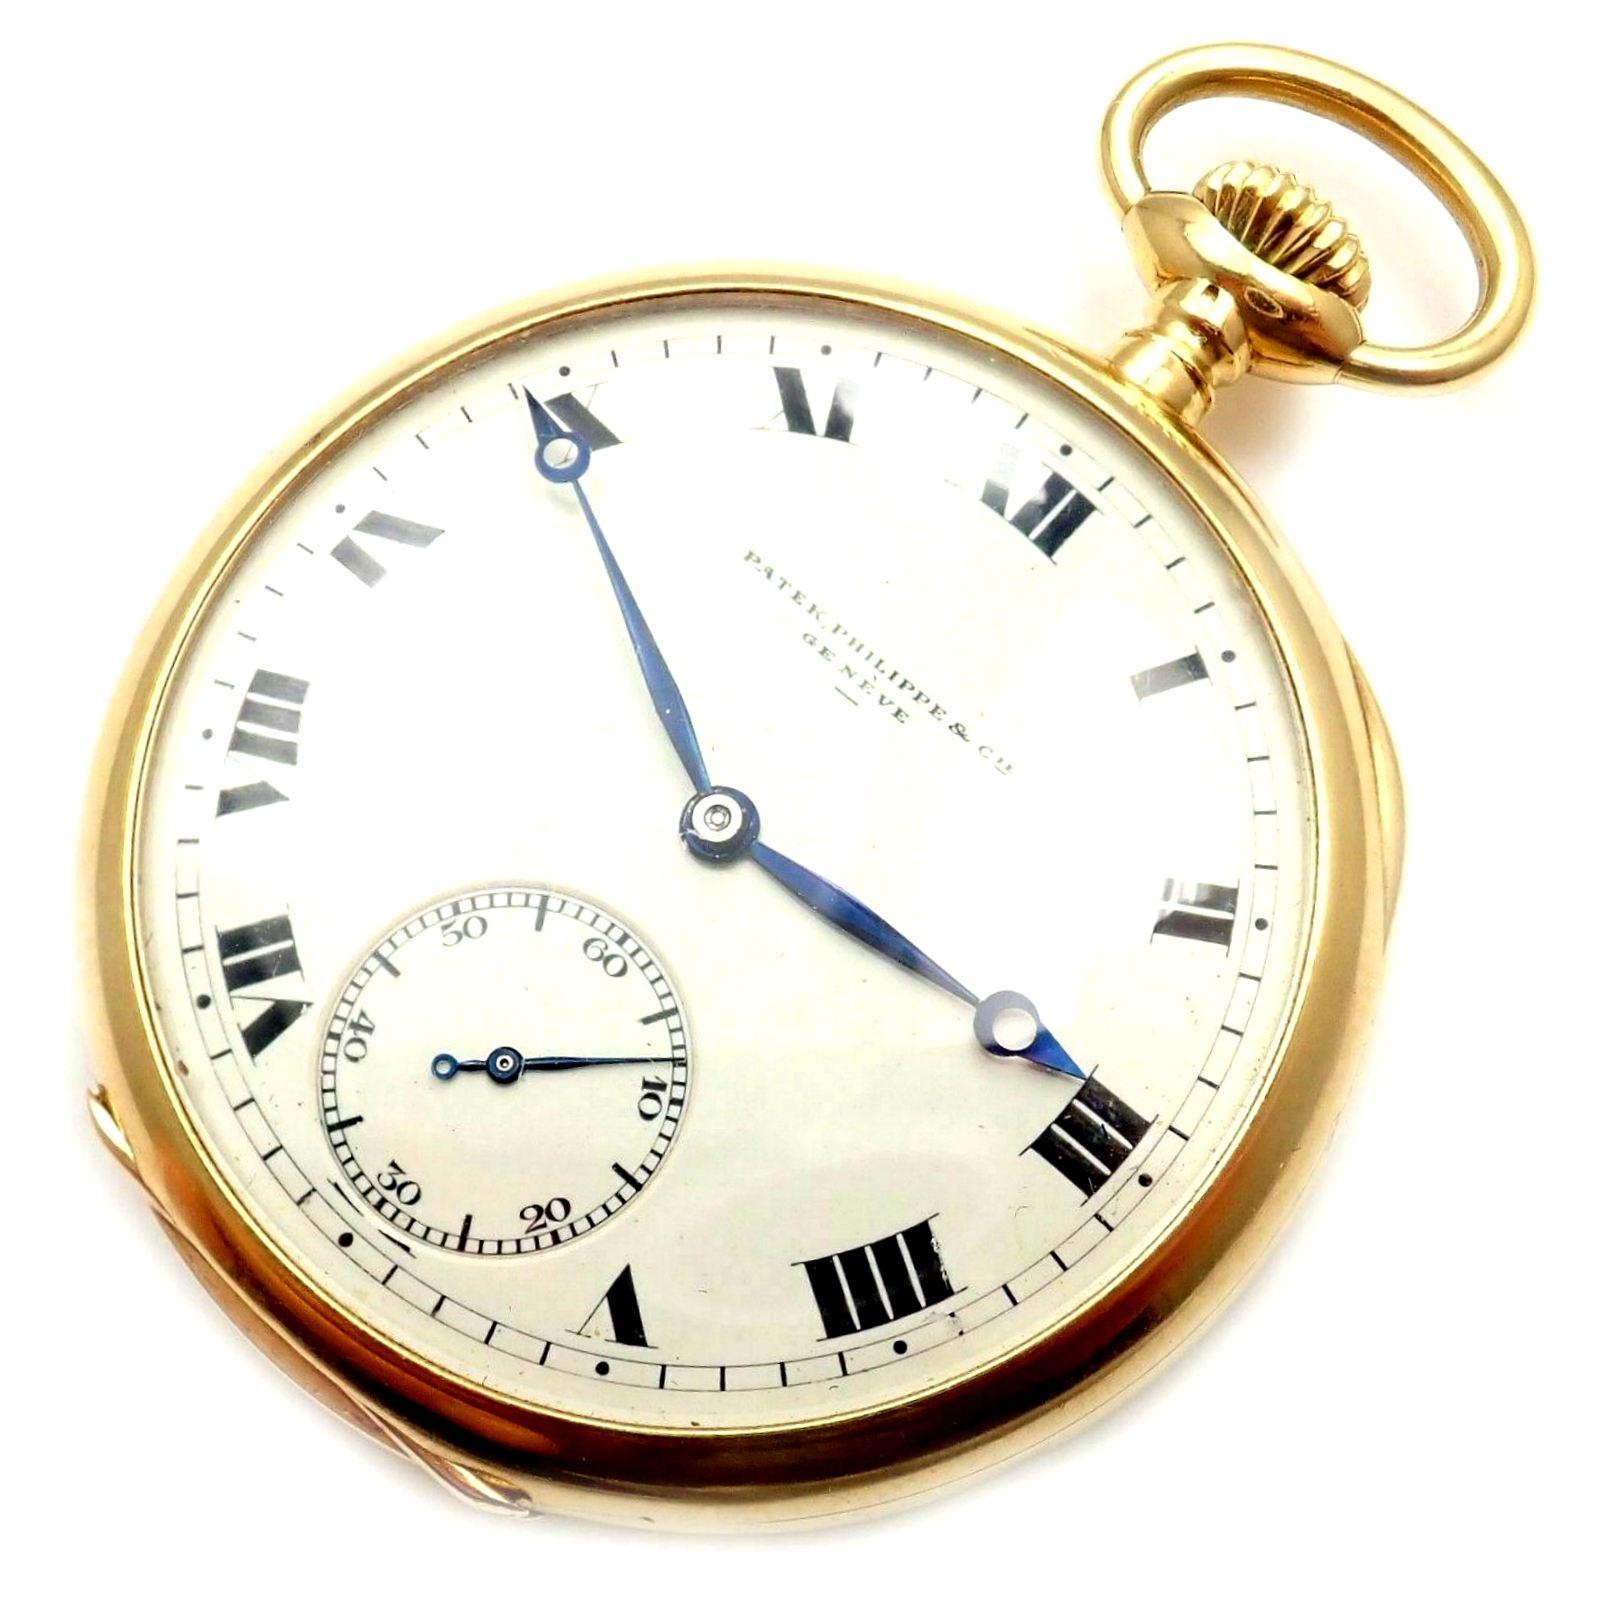 18k yellow gold triple signed pocket watch by Patek Philippe.
Works great, a must have.
Details:
Case Size: 46.5mm
Weight: 71.5 grams
Movement: Manual wind
Dial: Porcelain Dial
Stamped Hallmarks: Patek Philippe & Cie
Geneva Switzerland
PPco 18k